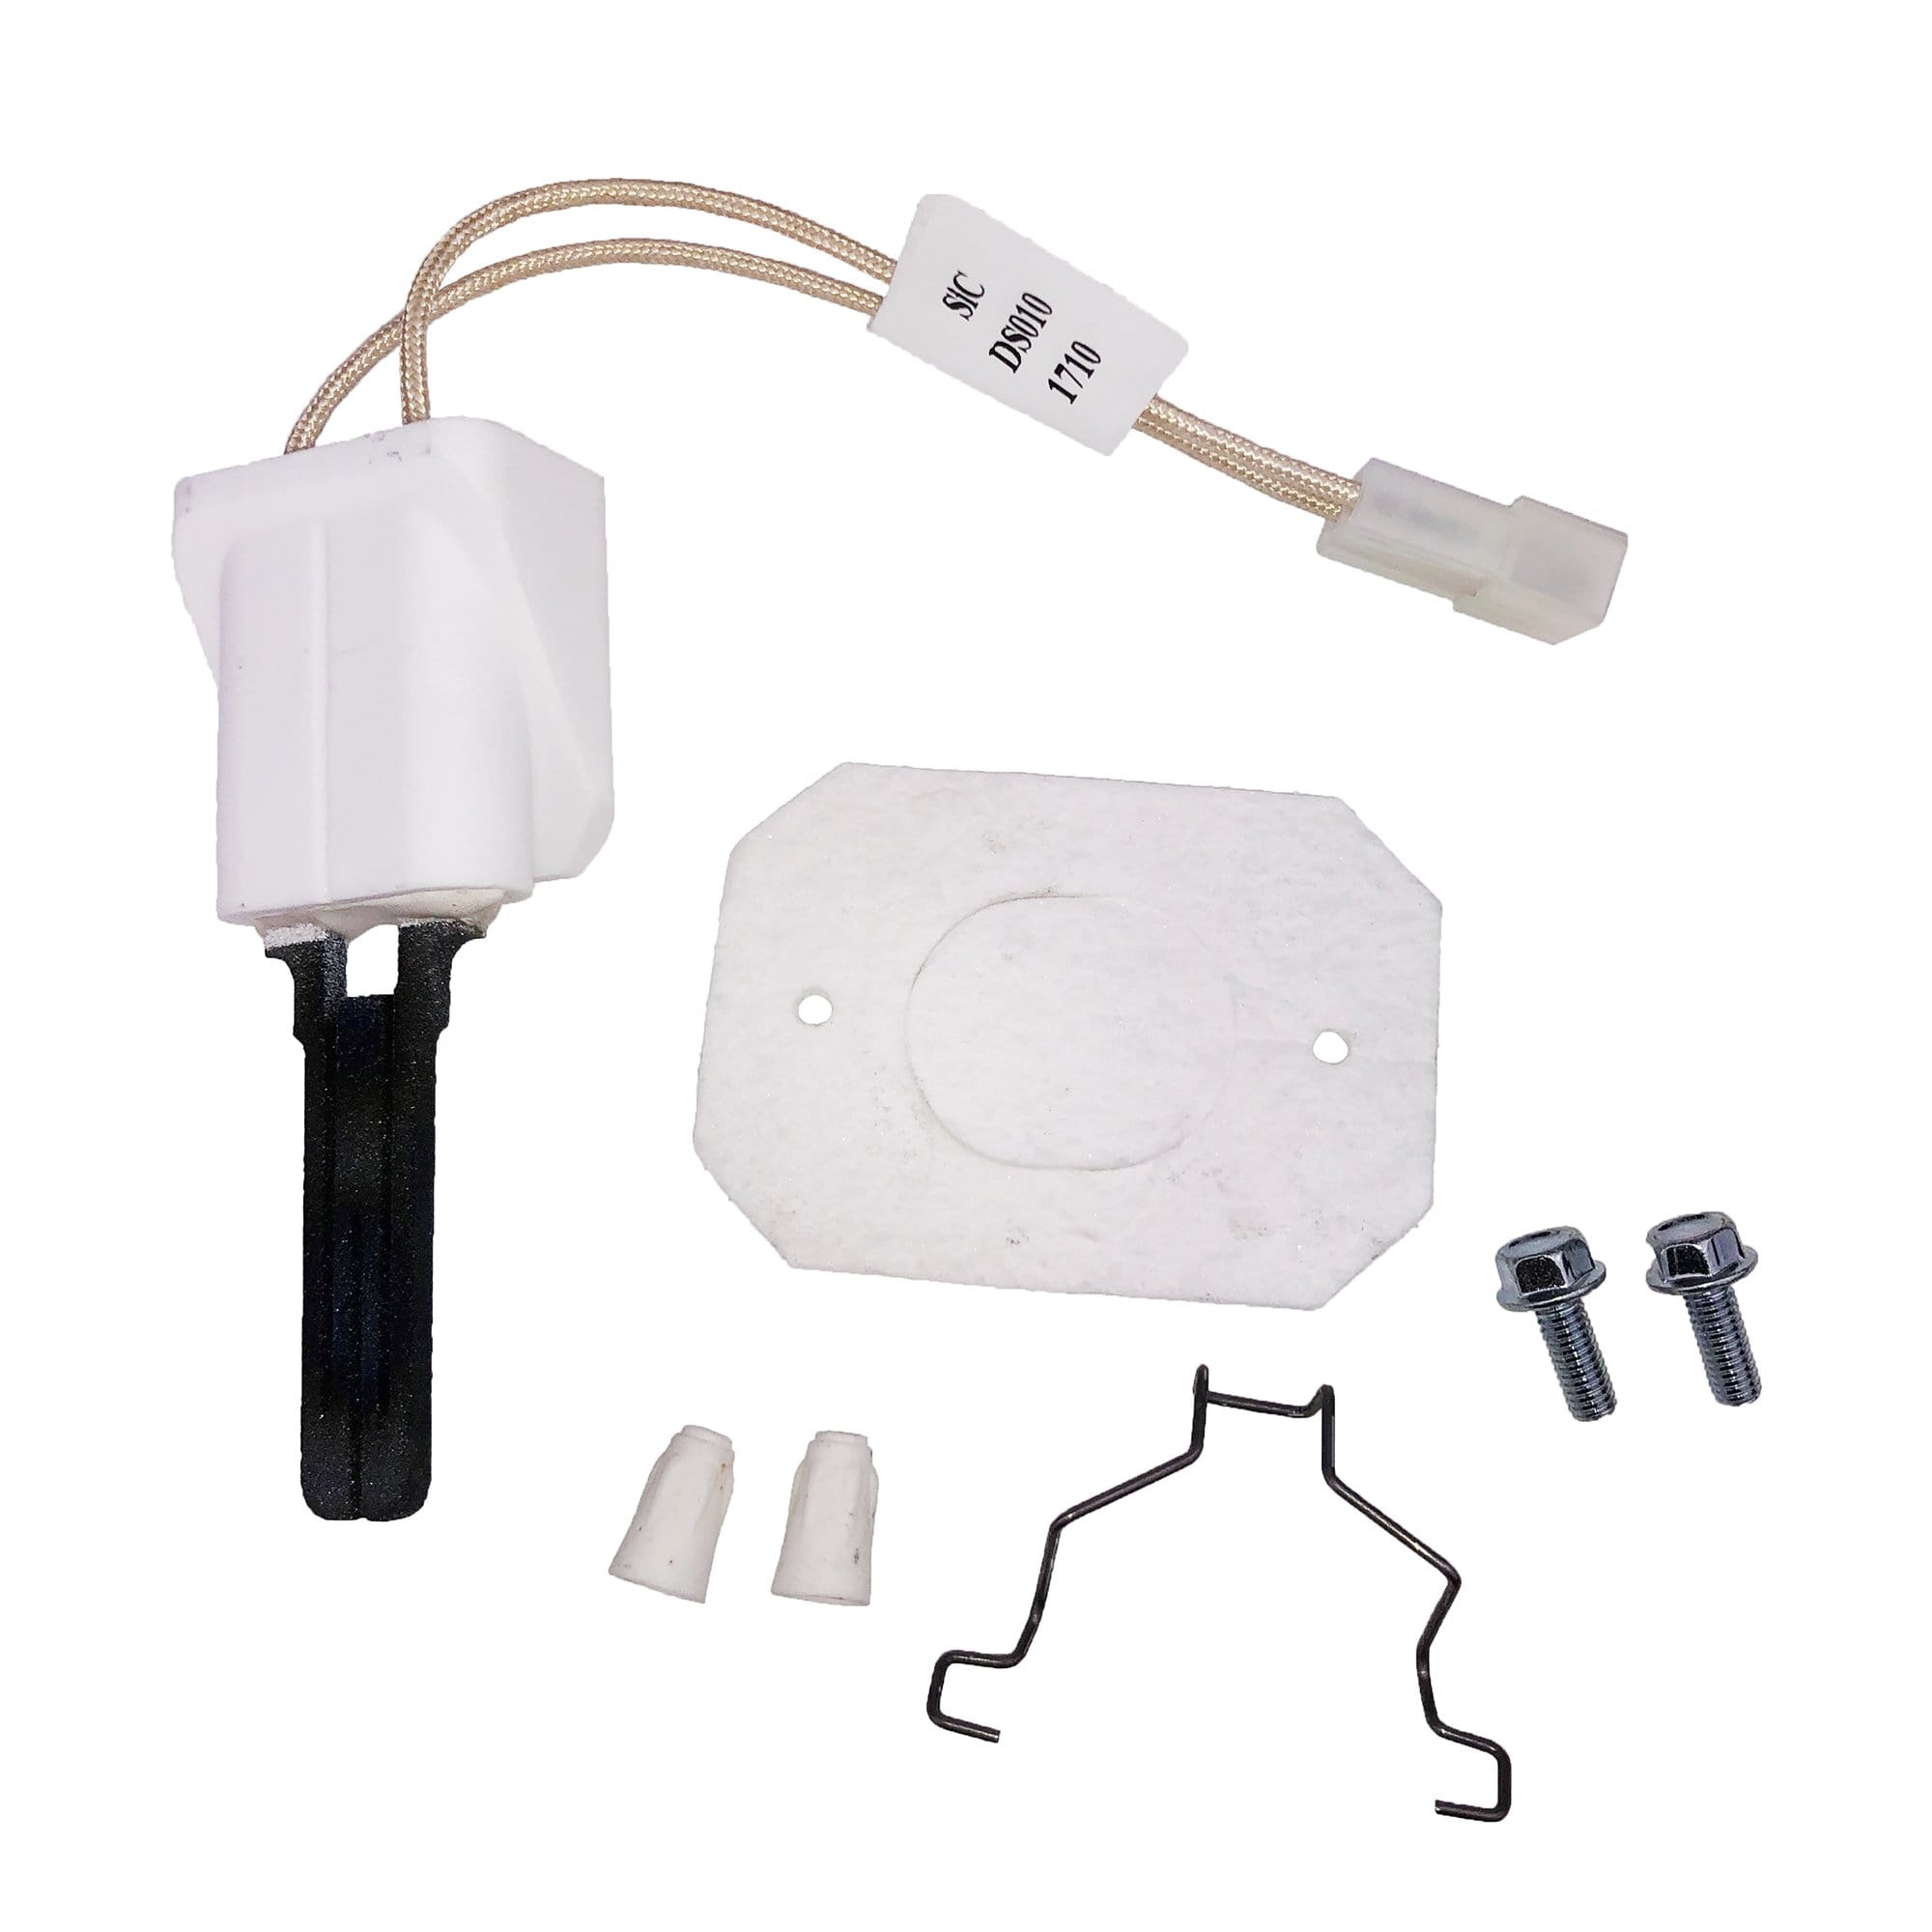 Packard IG3033 Flat Silicon Igniter Kit